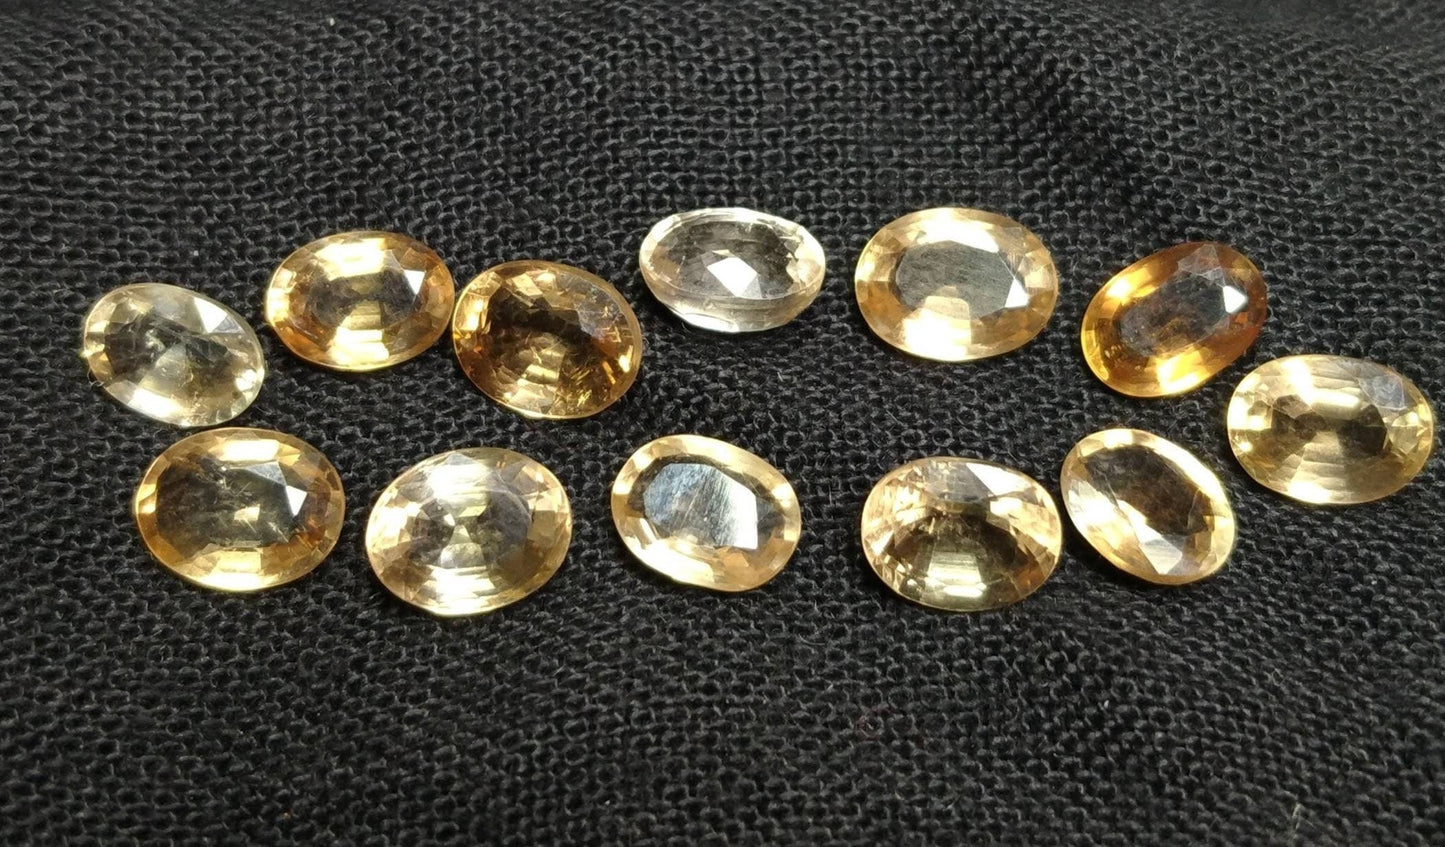 ARSAA GEMS AND MINERALSNatural fine quality beautiful 22 carats small Jewellery set of calibrated oval shapes faceted small sized topaz gems - Premium  from ARSAA GEMS AND MINERALS - Just $40.00! Shop now at ARSAA GEMS AND MINERALS